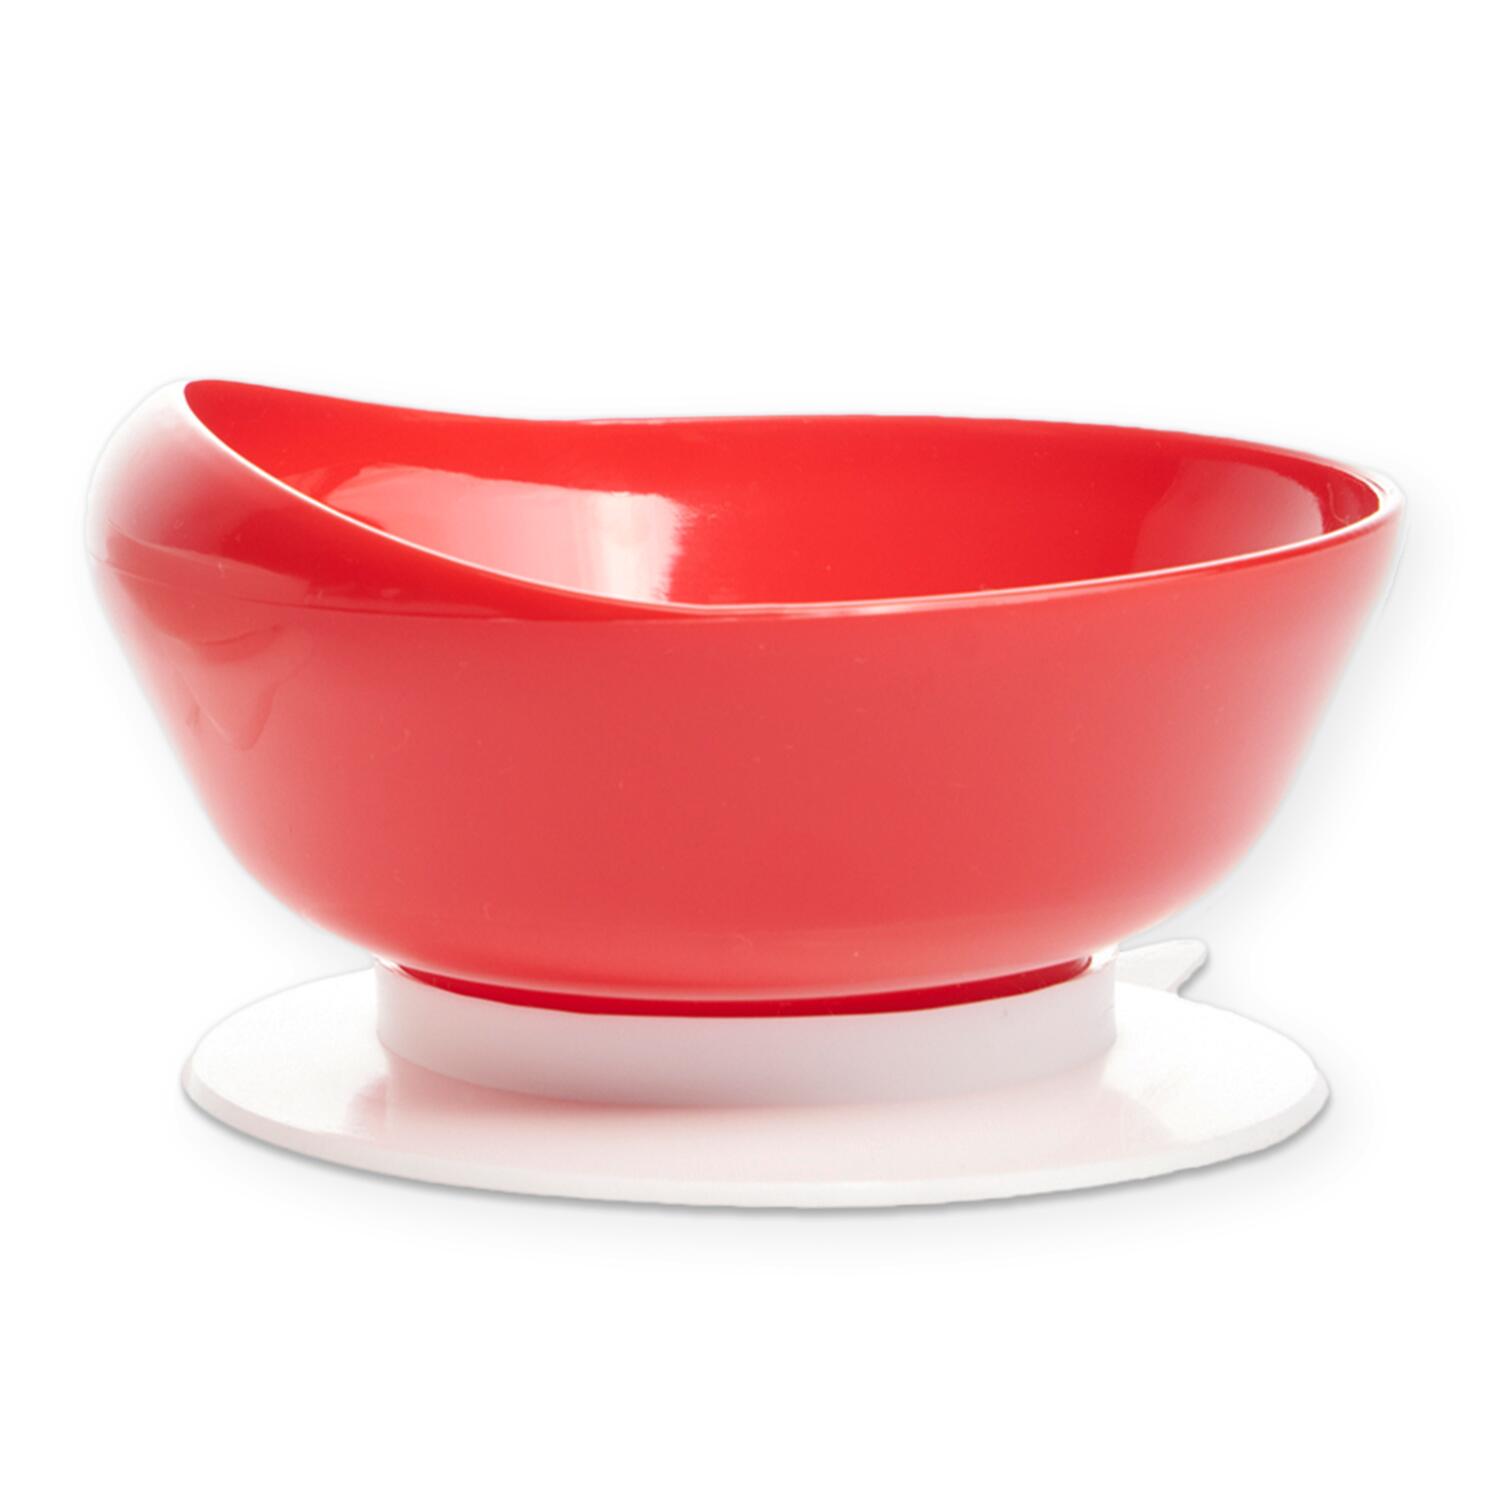 Dignity Soup Bowl - White from Essential Aids